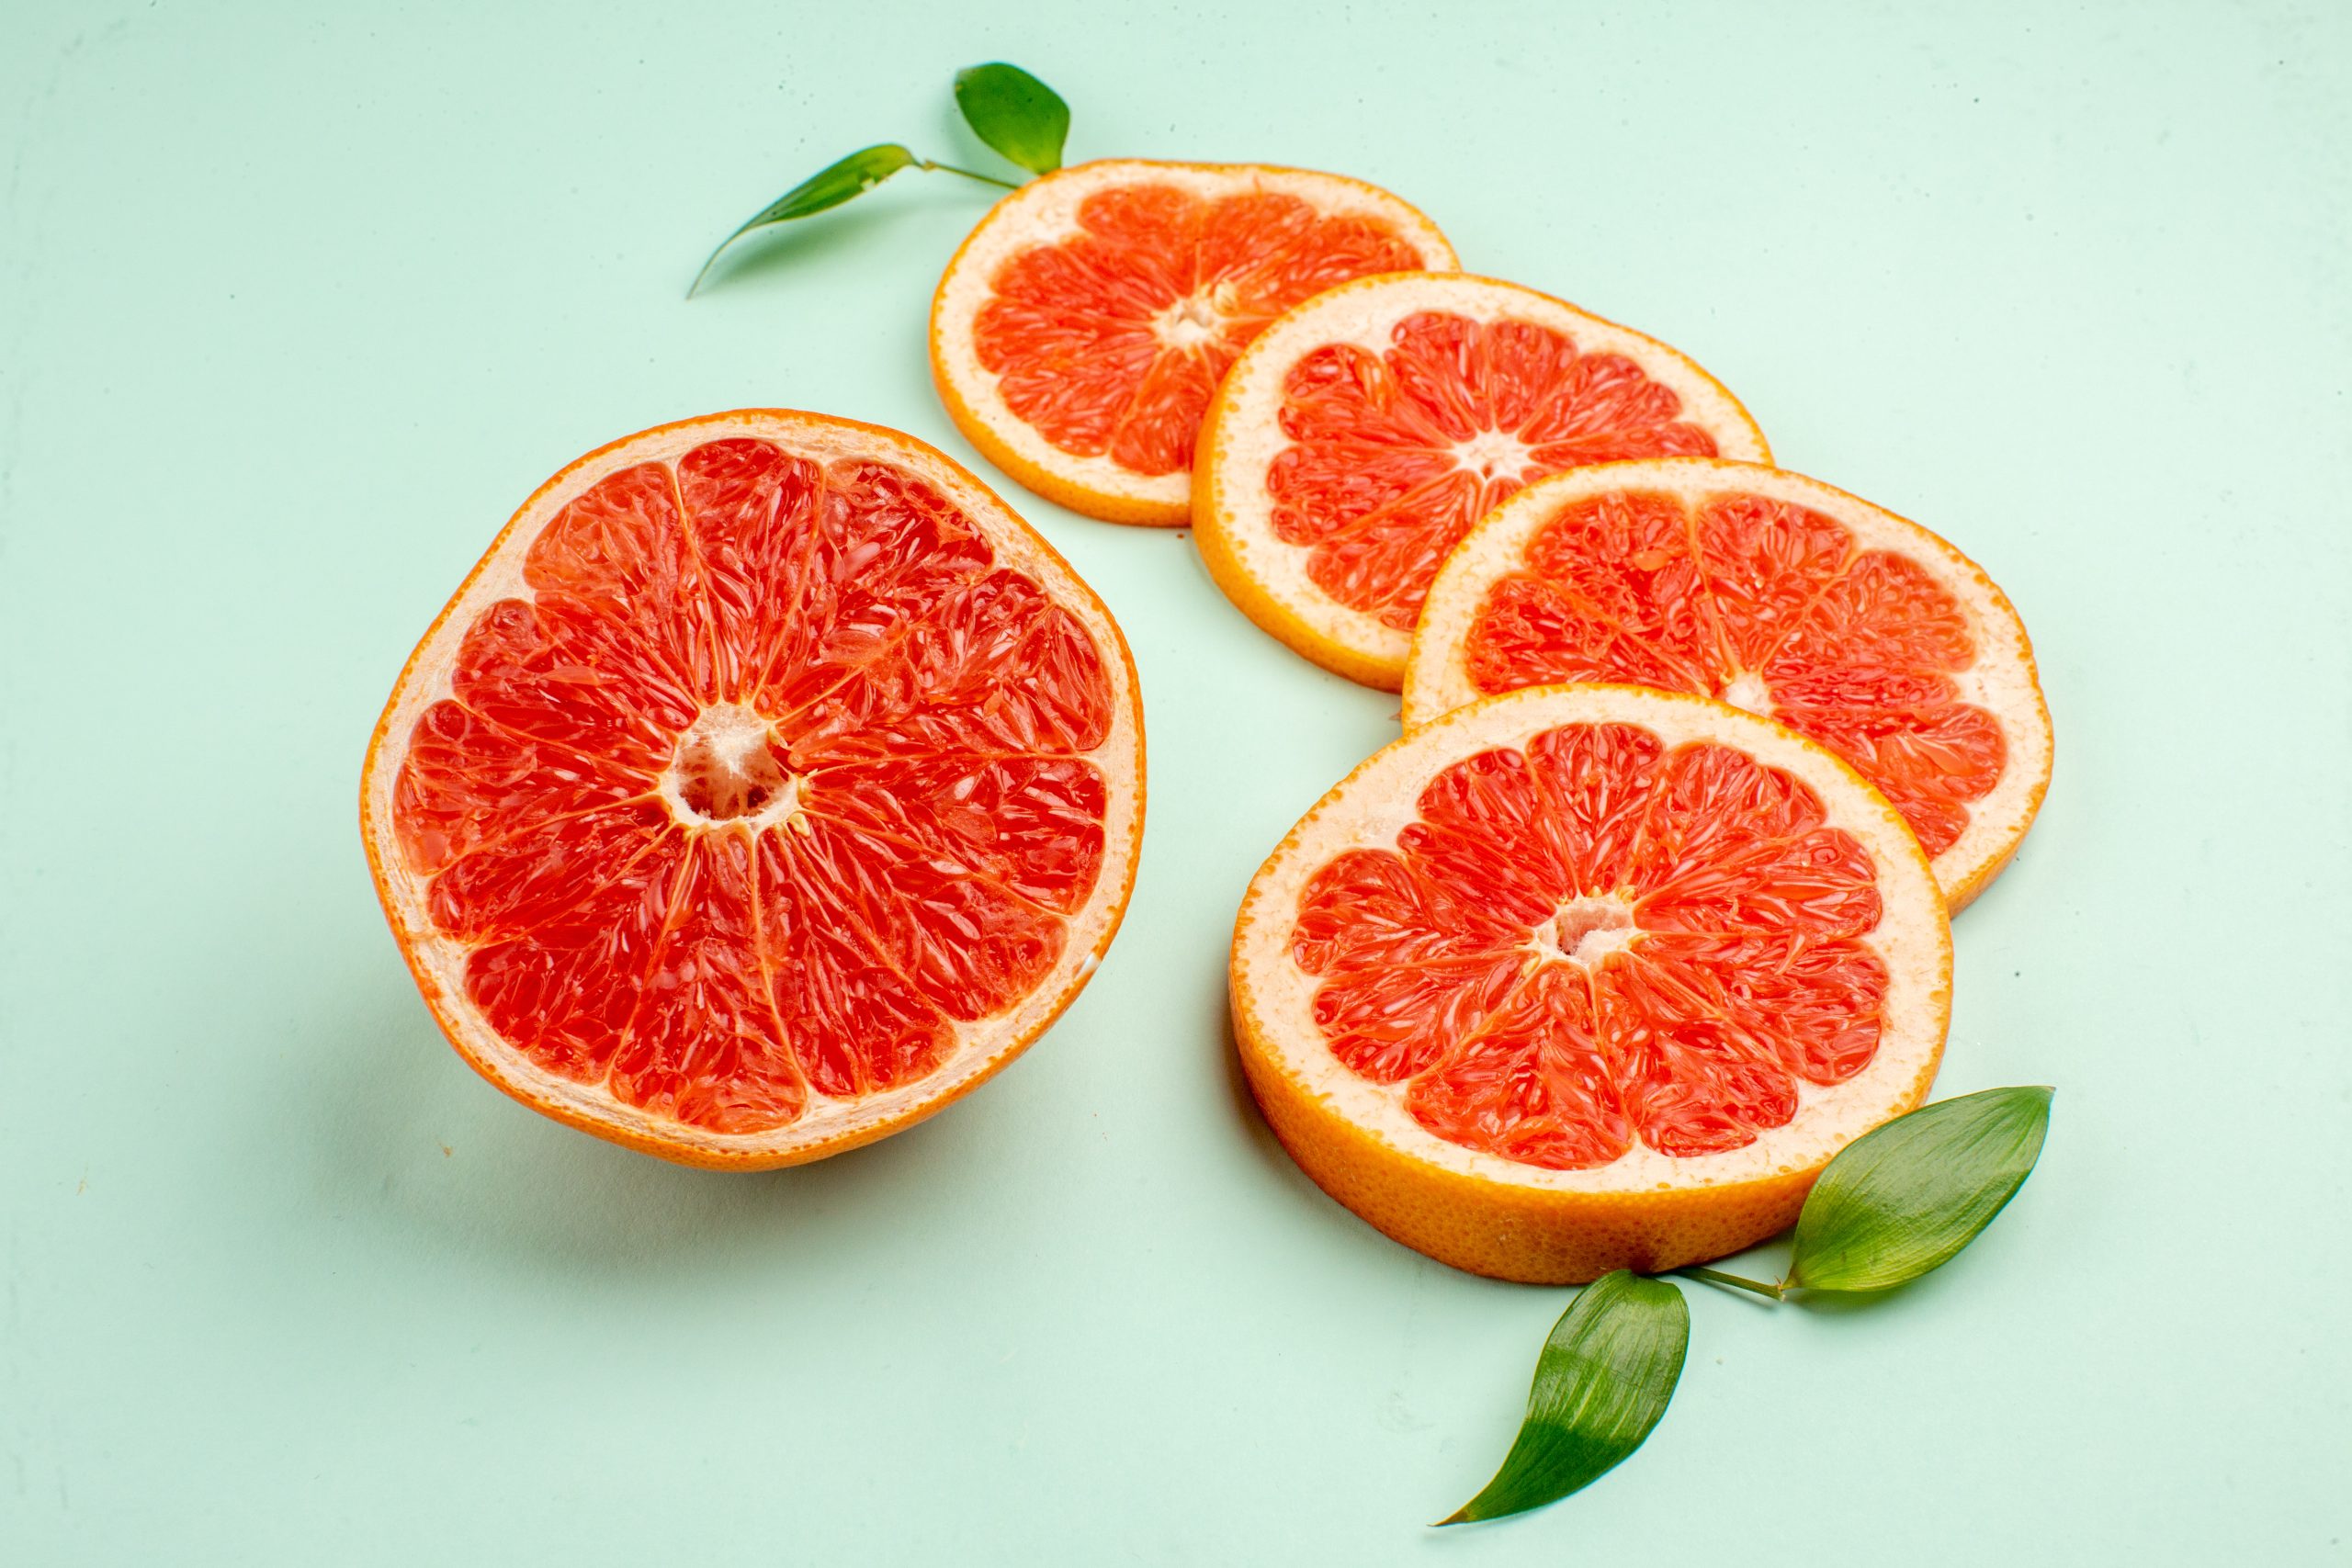 Grapefruit Benefits Sexually: Benefits that directly impact your sexual capabilities 